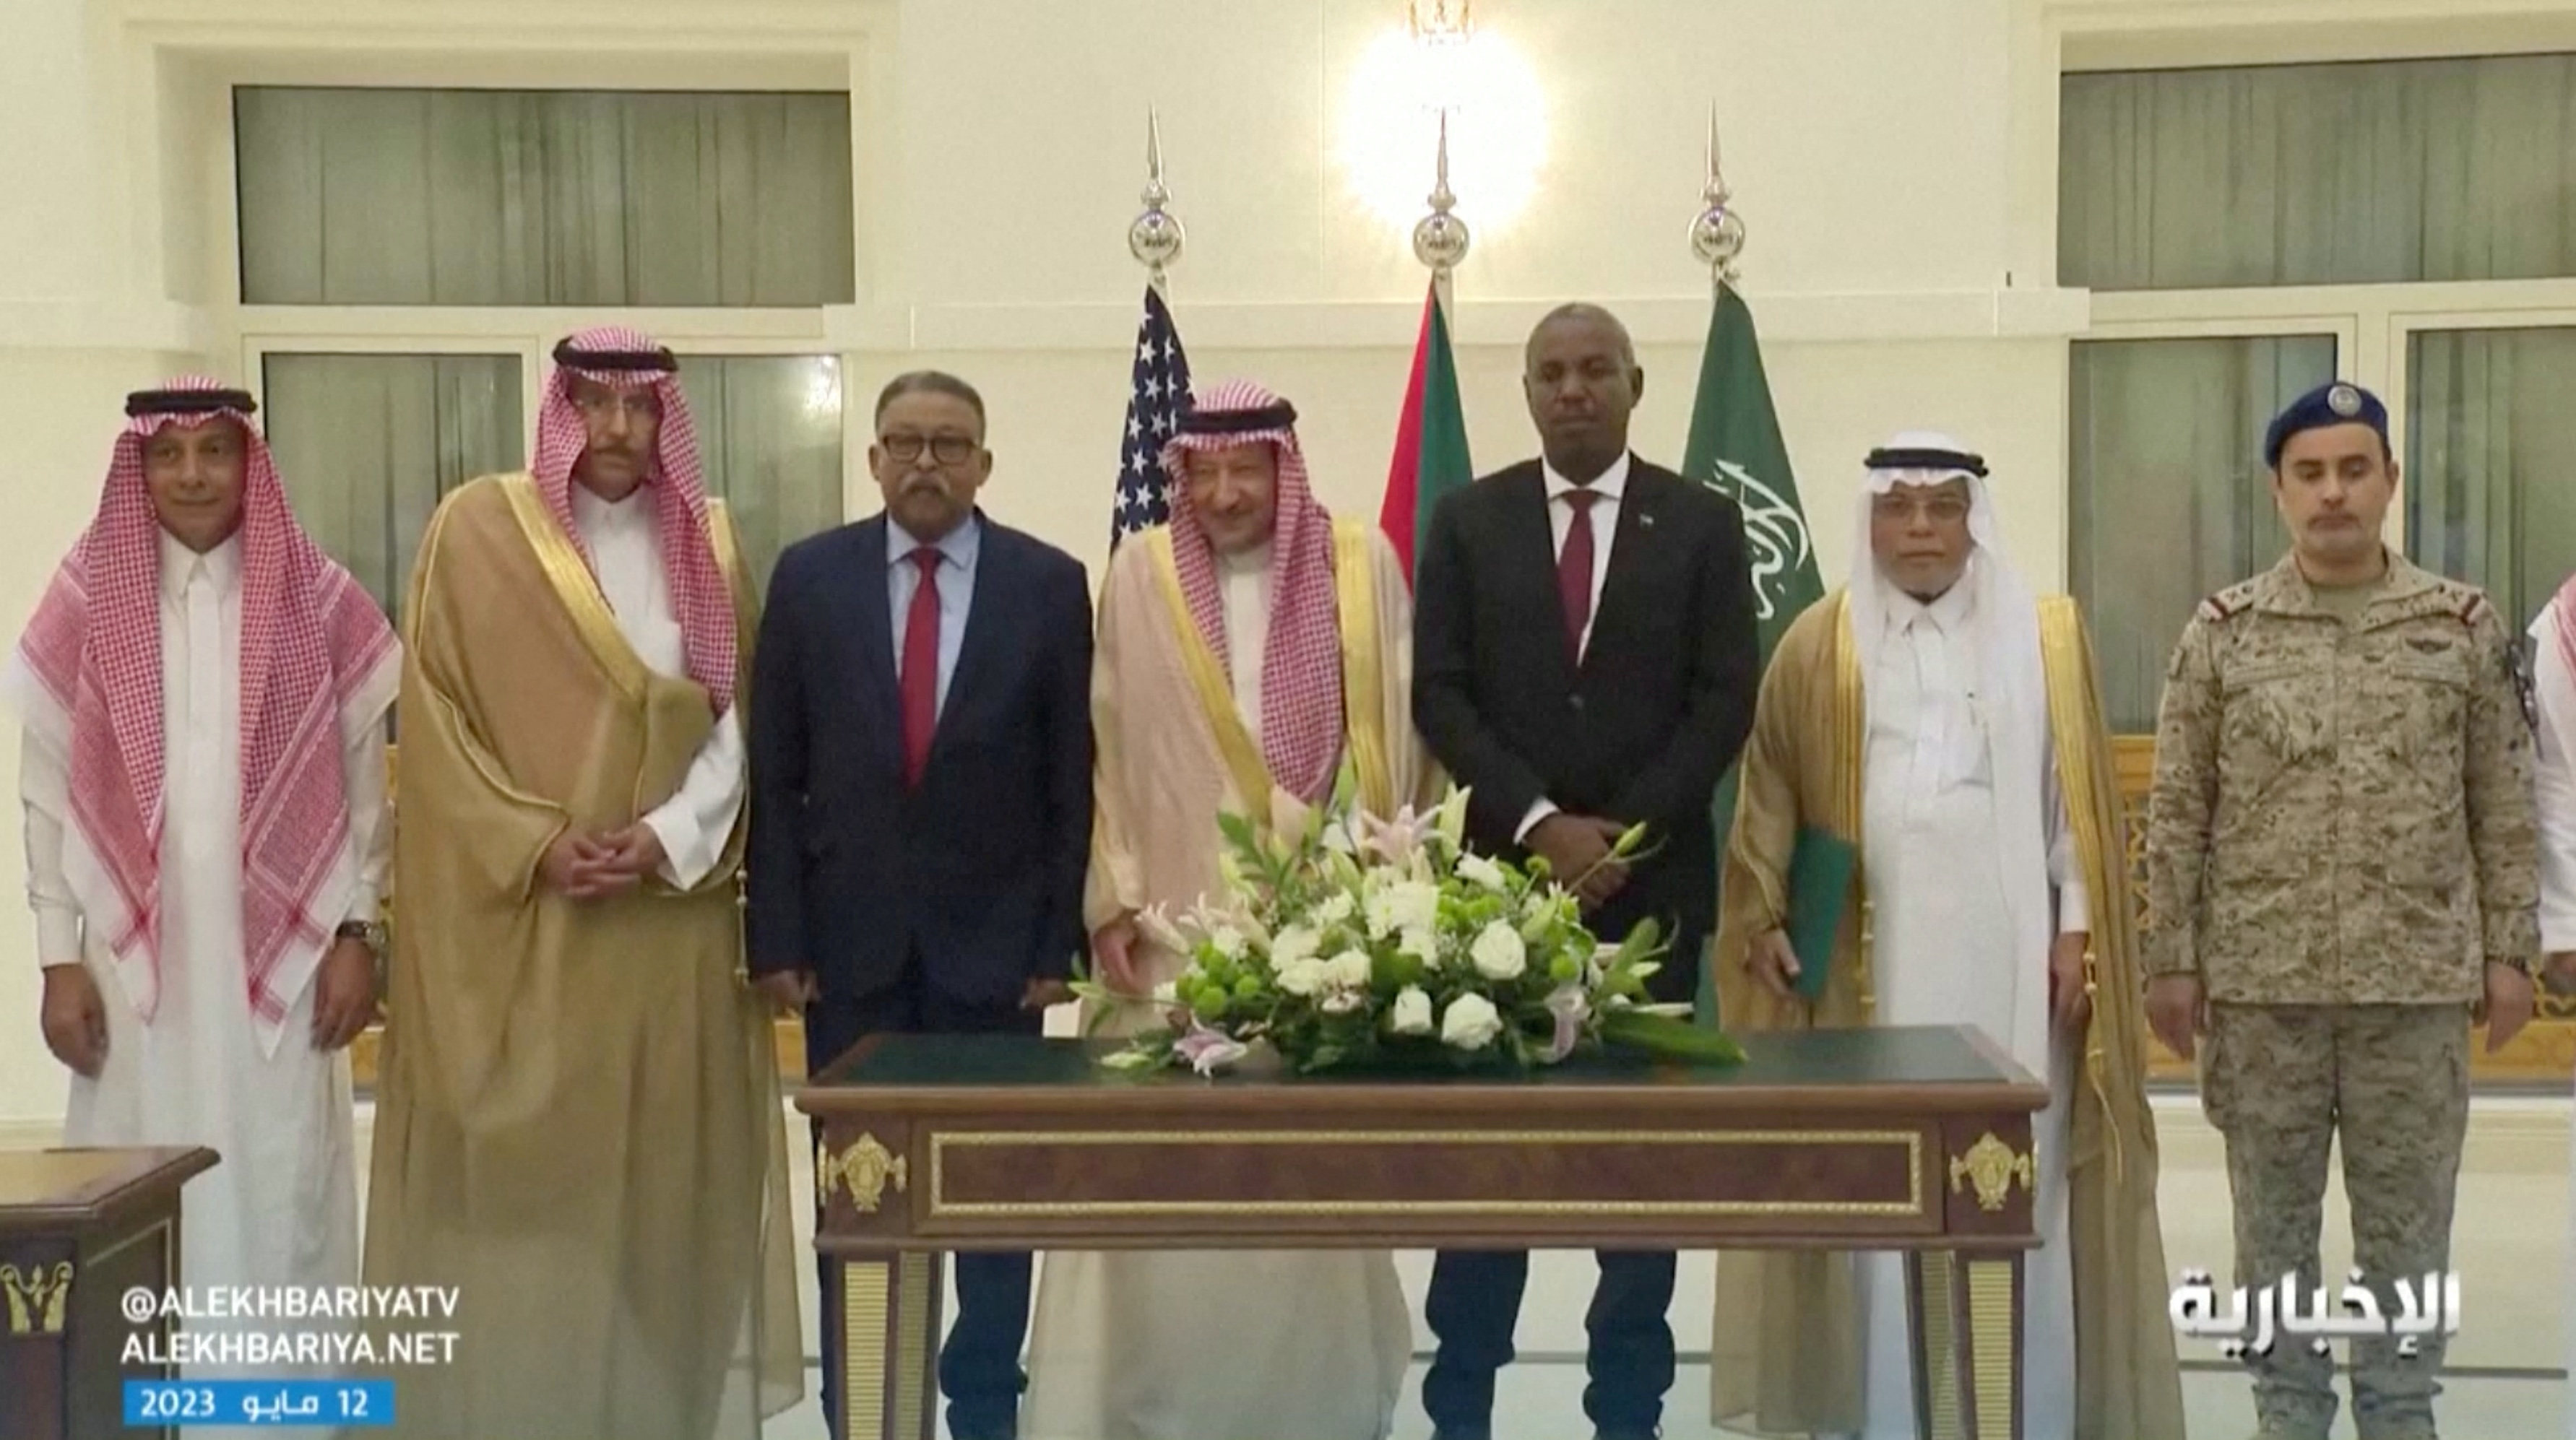 Sudan’s army and rival paramilitary RSF sign a declaration in Jeddah, Saudi Arabia that signifies their commitment to protect the civilians of Sudan but not to a ceasefire. Photo: Reuters